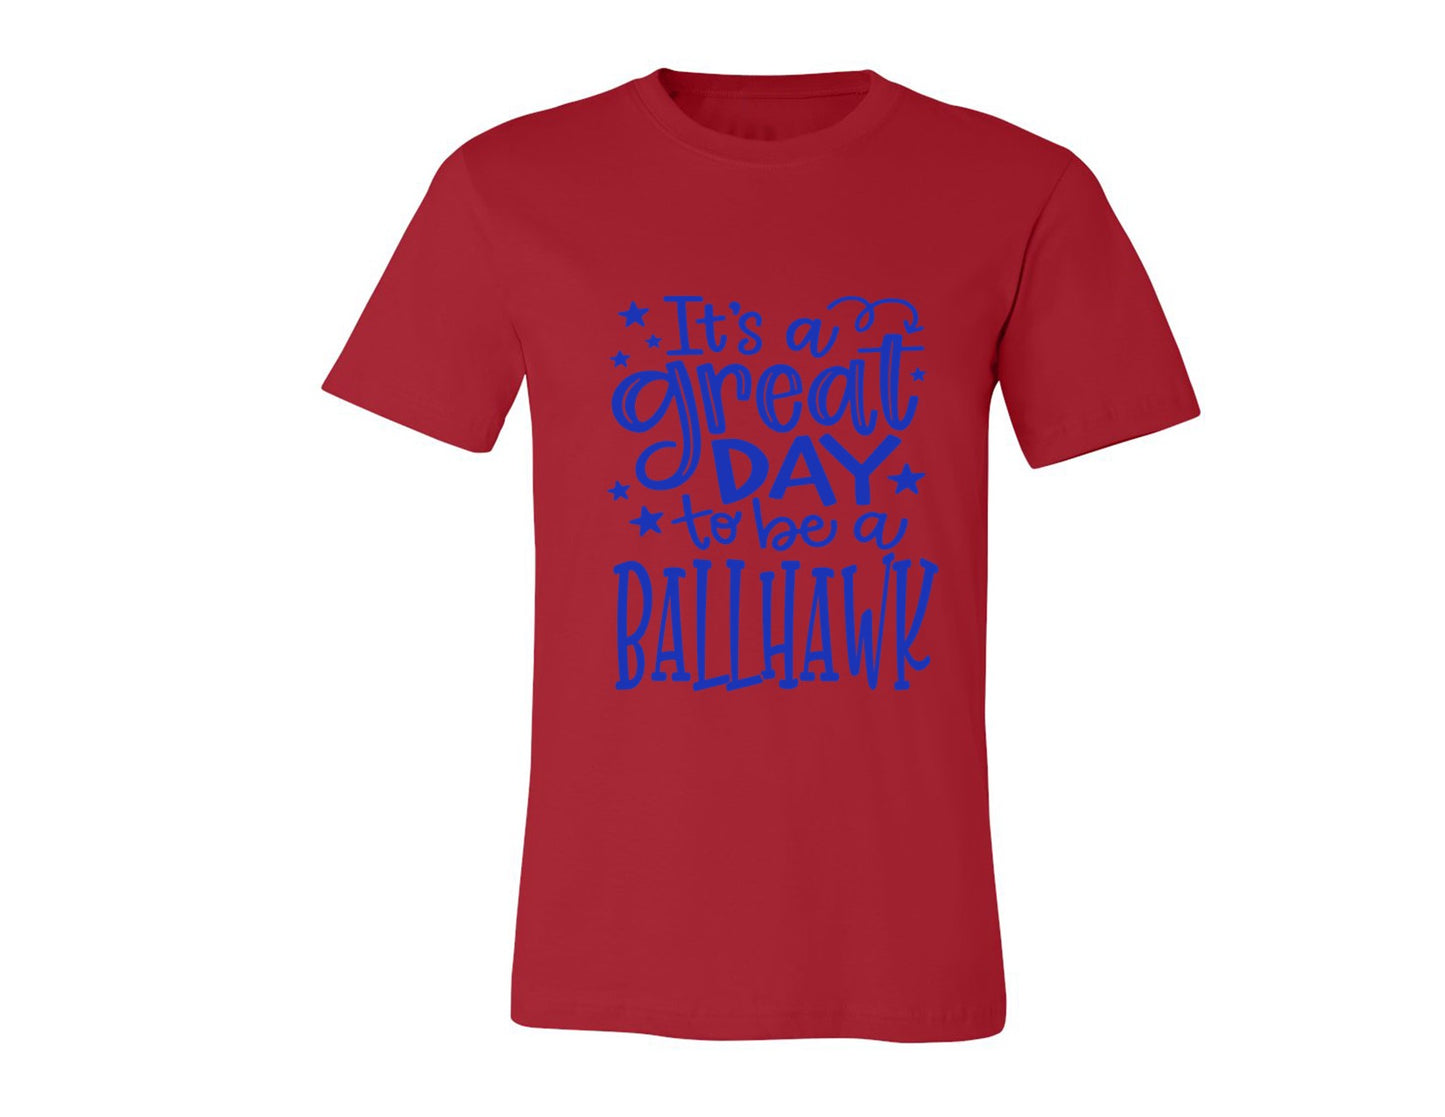 Ballhawks - Great Day to Be a Ballhawk - Tee and V-Neck